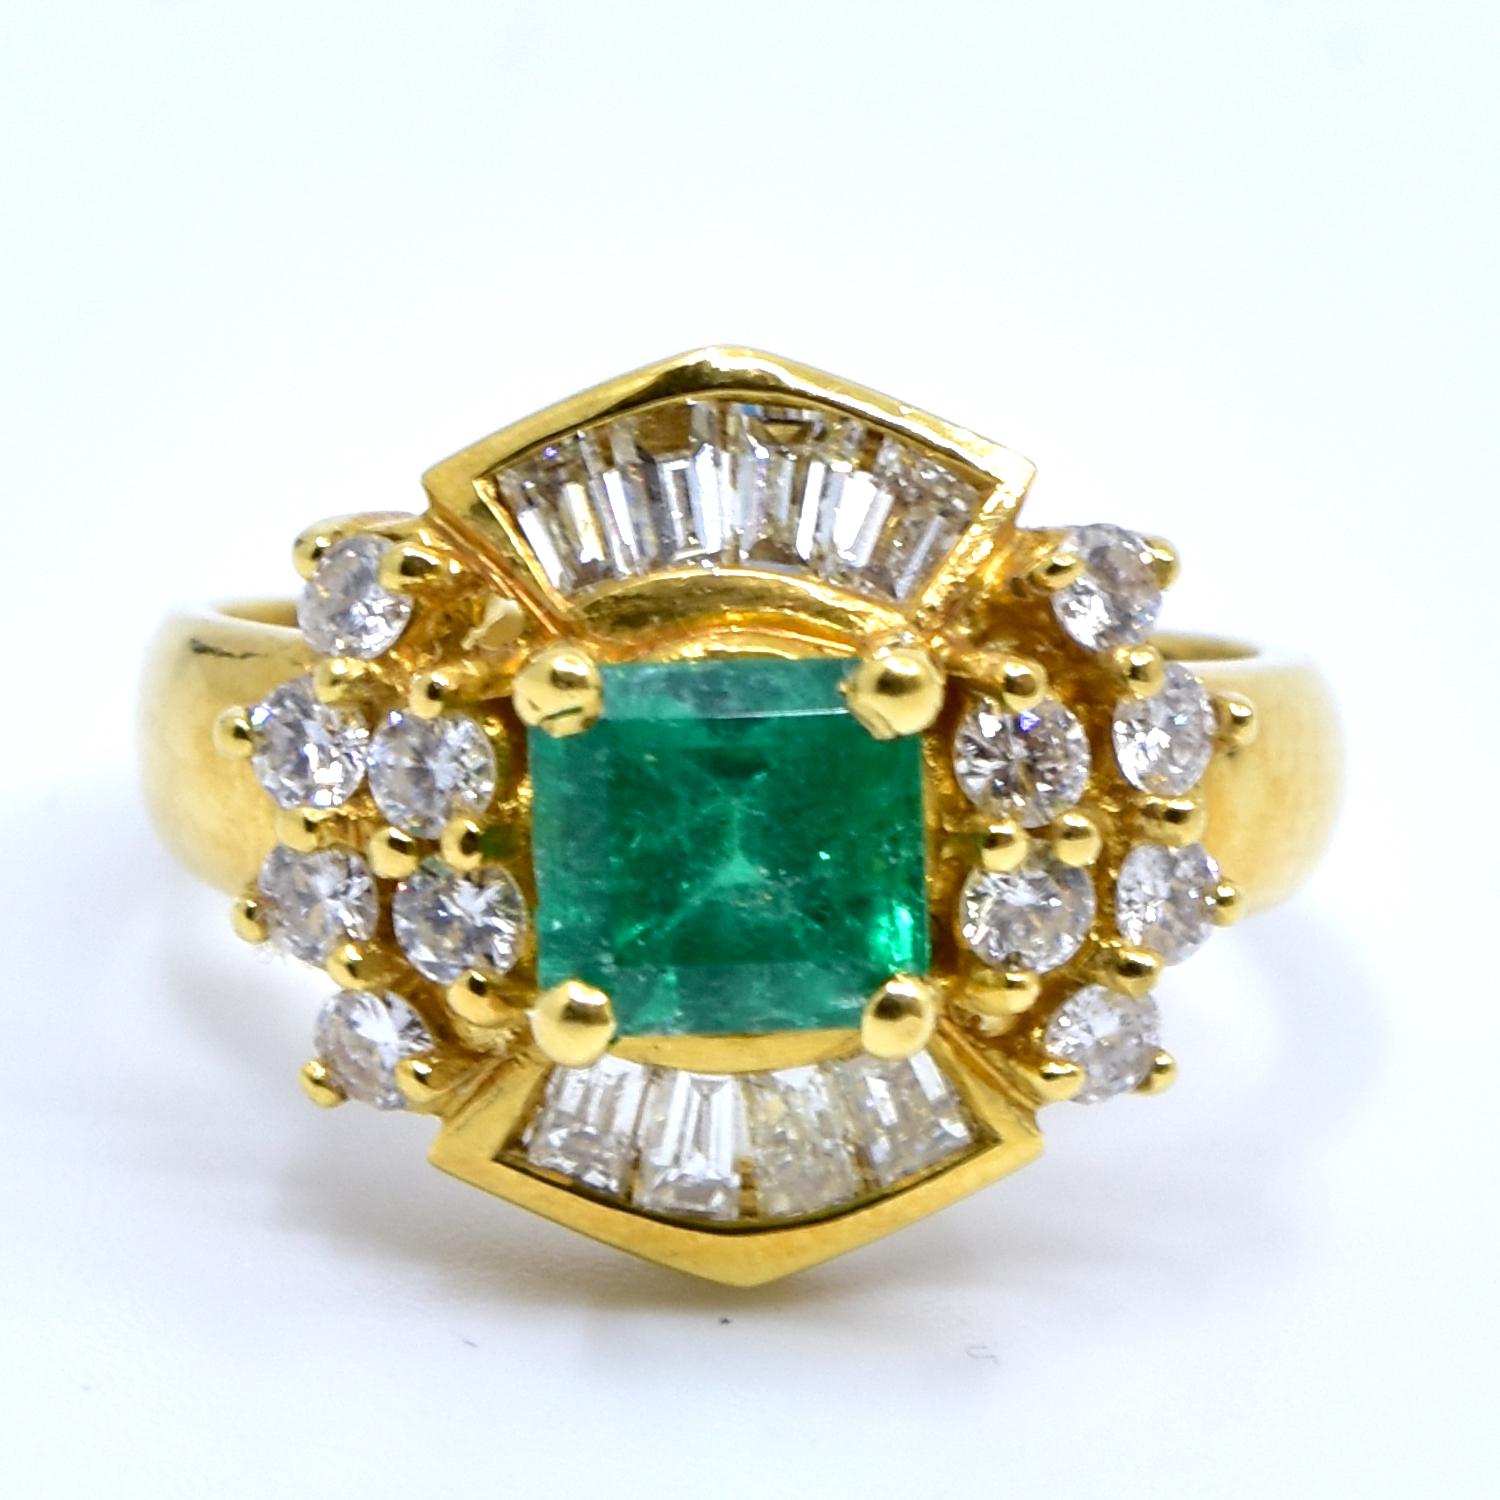 Style: Fashion Ring

Metal Type: 18k Yellow Gold

Stones: Round Brilliant Cut Diamonds (Approx. .60 Ctw)

Baguette Cut diamonds (Approx. 1 Ct)

Center Emerald (Approx. 1 Ct)

Ring Size: 6

Total Item Weight (grams): 6 grams

​Includes: Brilliance